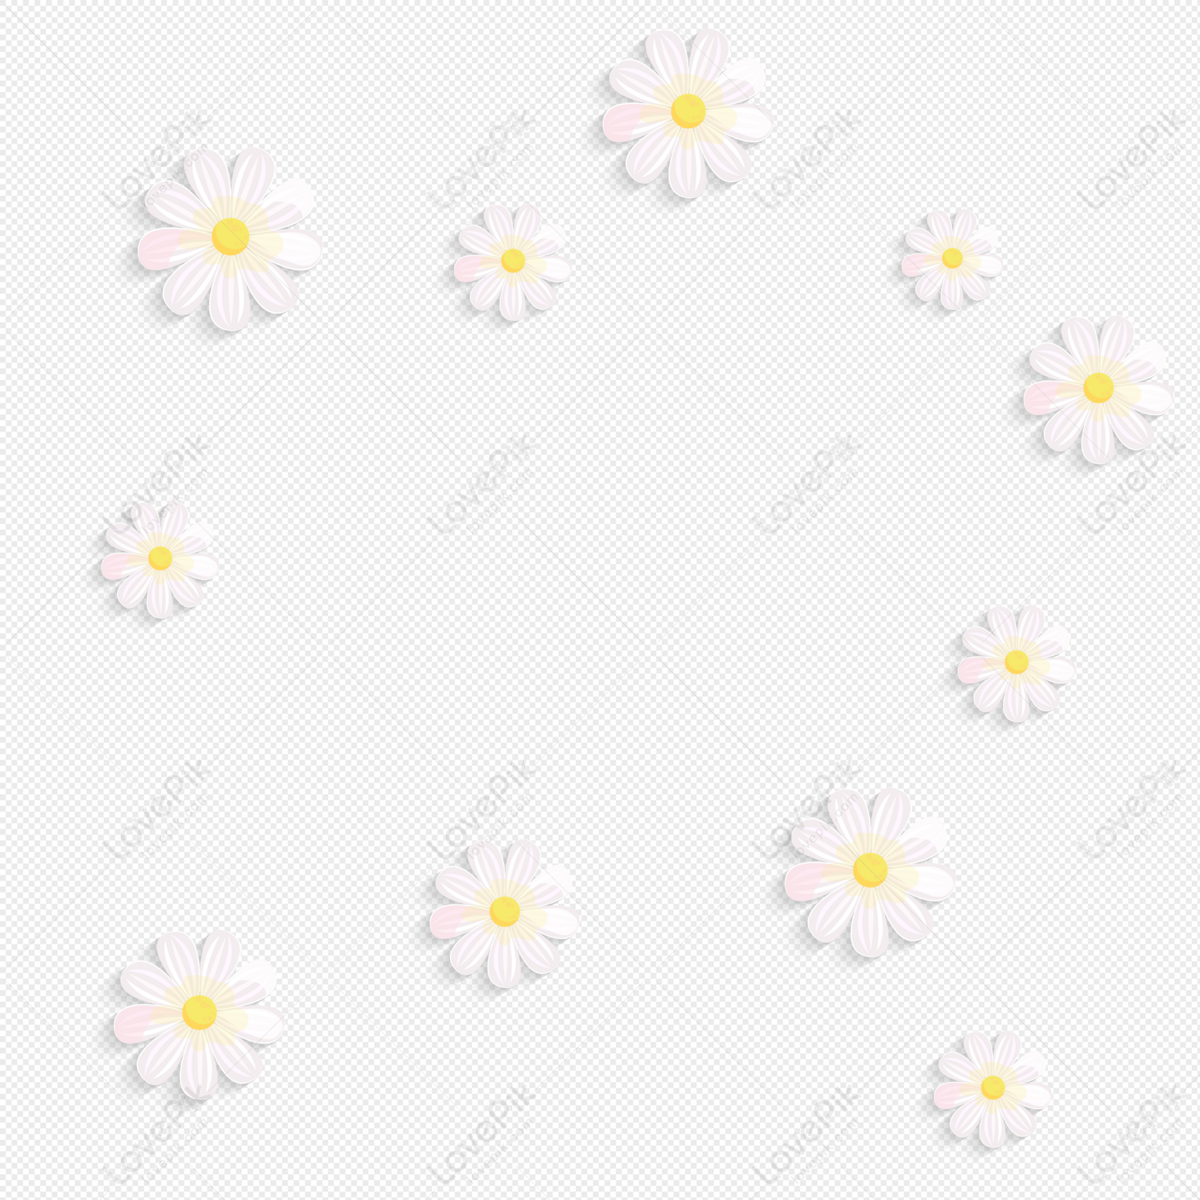 Small White Flower Background Free PNG And Clipart Image For Free Download  - Lovepik | 401403549